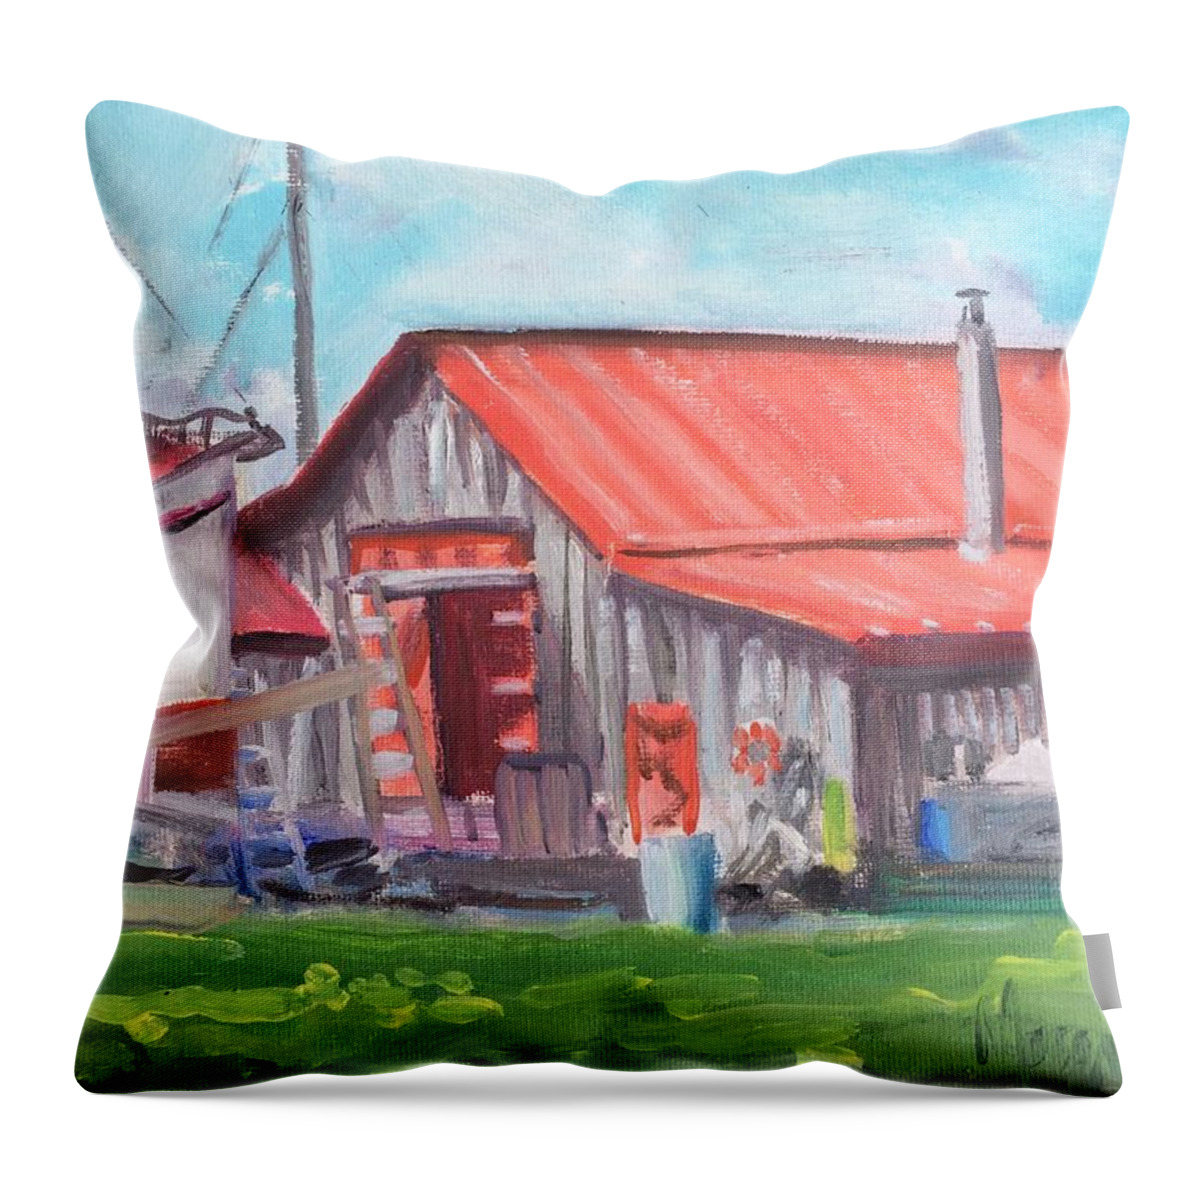 Boat Boats St Michaels Md Maritime St. Michaels Maritime Museum Boatyard Throw Pillow featuring the painting St. Michaels Maritime Museum by Maggii Sarfaty